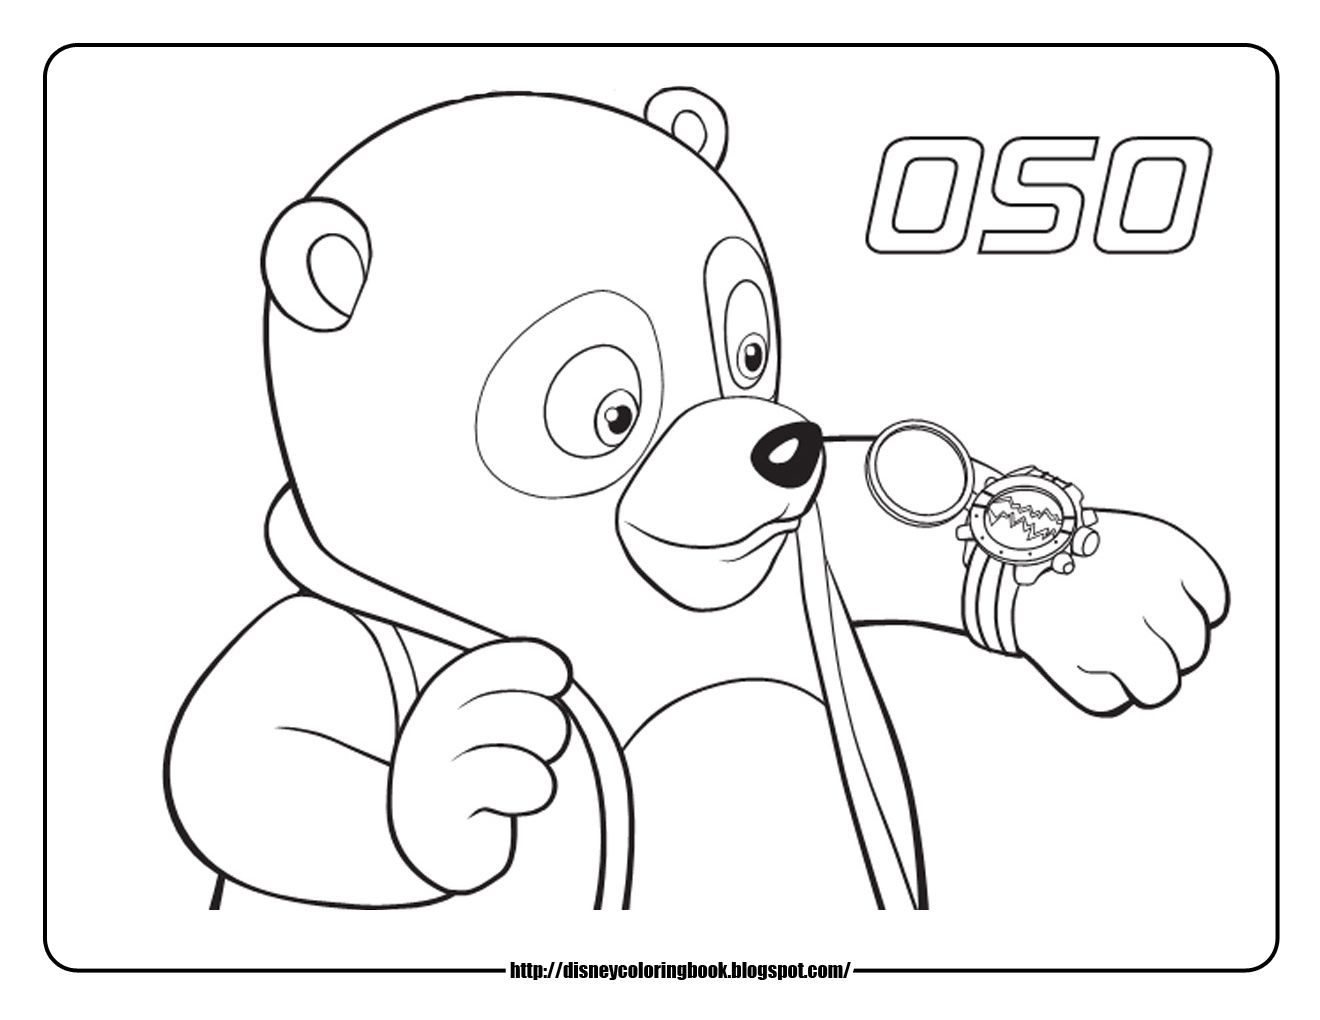 Download Special Agent Oso 1: Free Disney Coloring Sheets | Learn ...